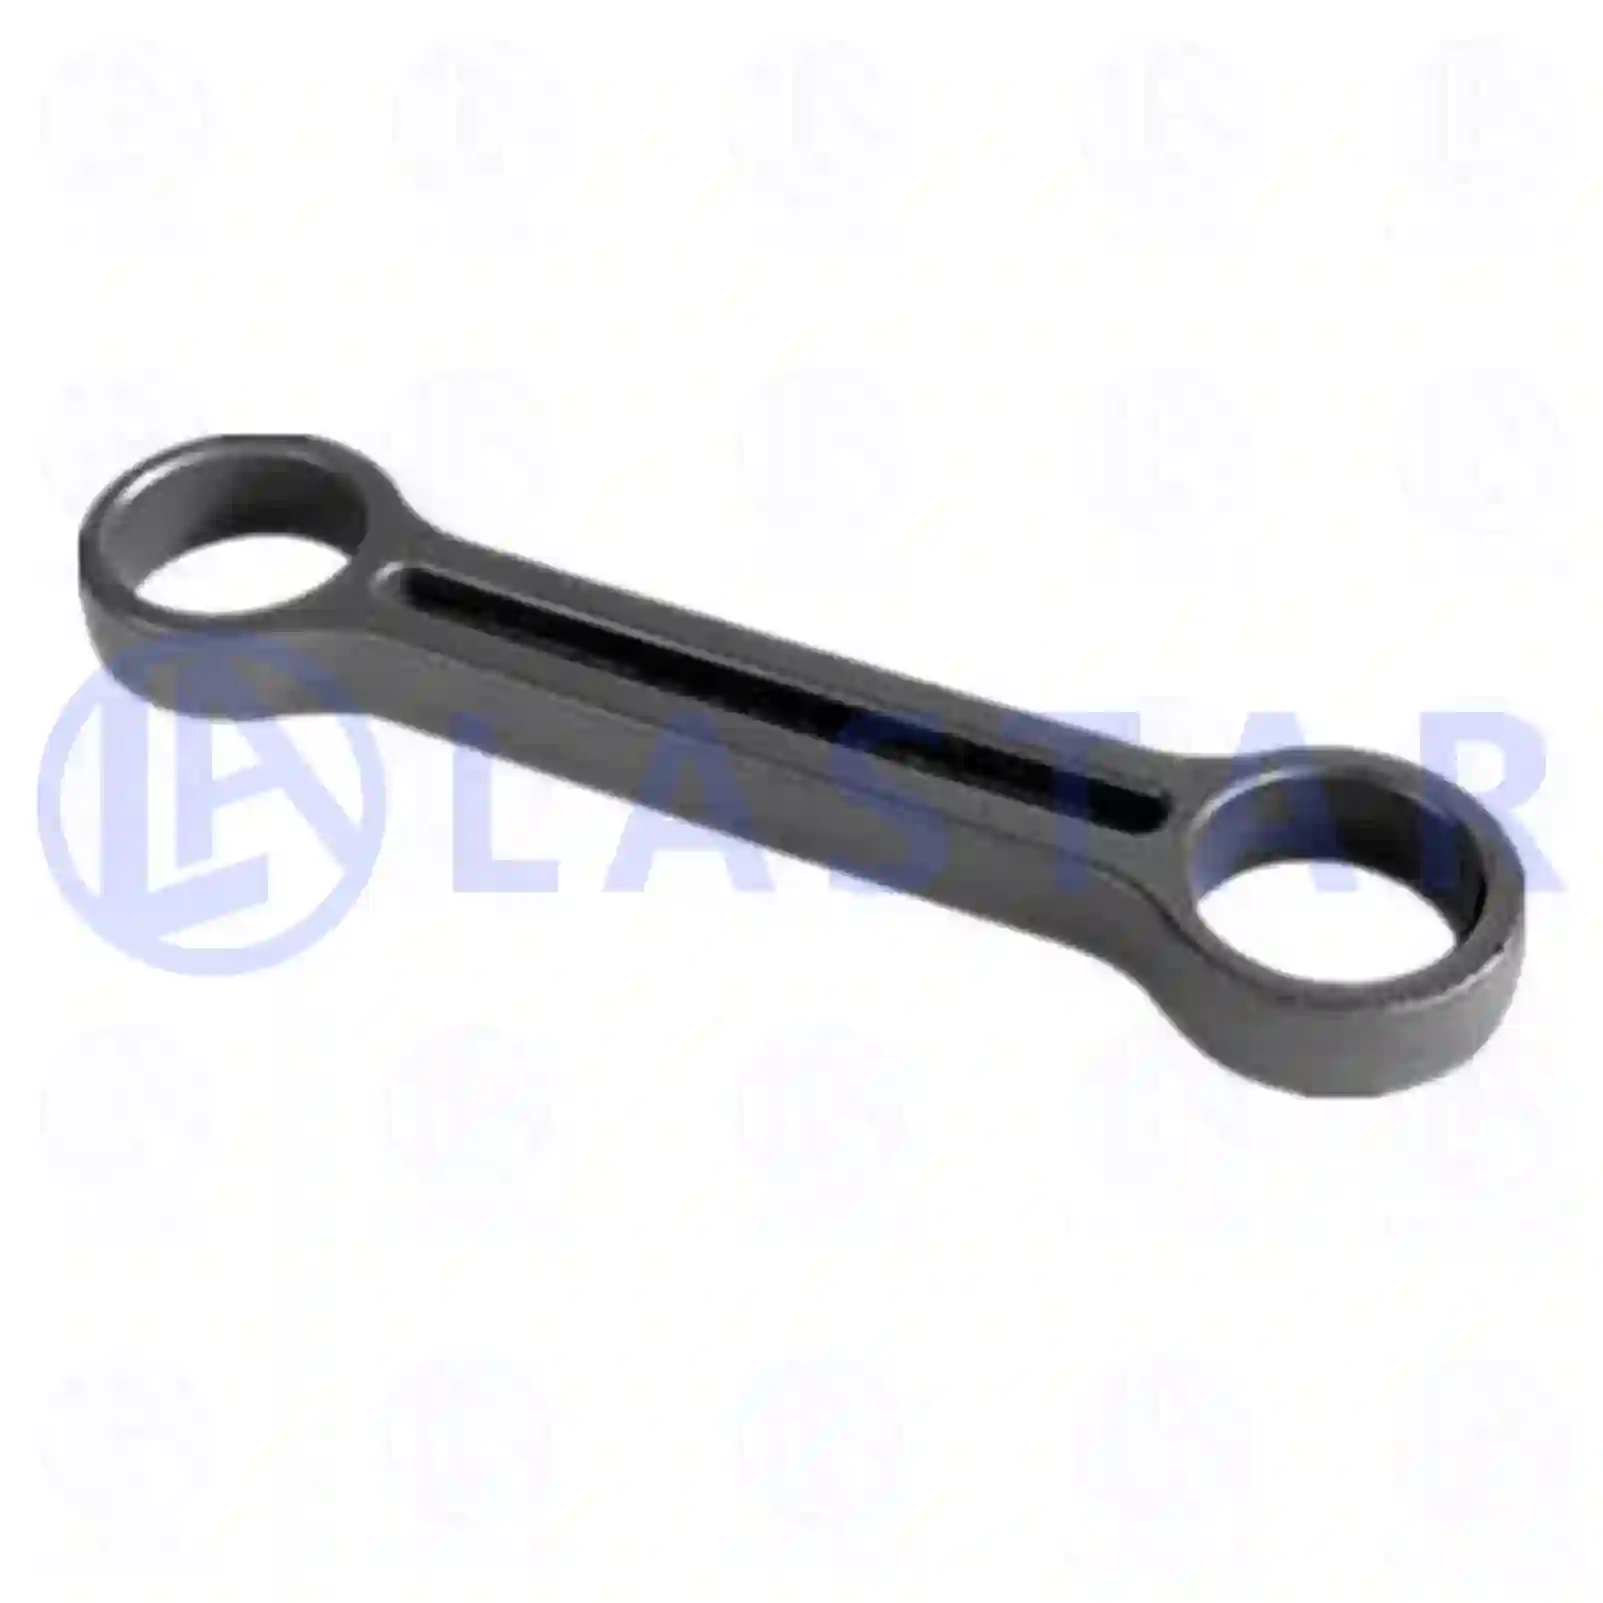 Connecting rod, stabilizer, 77727931, 9433260447, 94332 ||  77727931 Lastar Spare Part | Truck Spare Parts, Auotomotive Spare Parts Connecting rod, stabilizer, 77727931, 9433260447, 94332 ||  77727931 Lastar Spare Part | Truck Spare Parts, Auotomotive Spare Parts